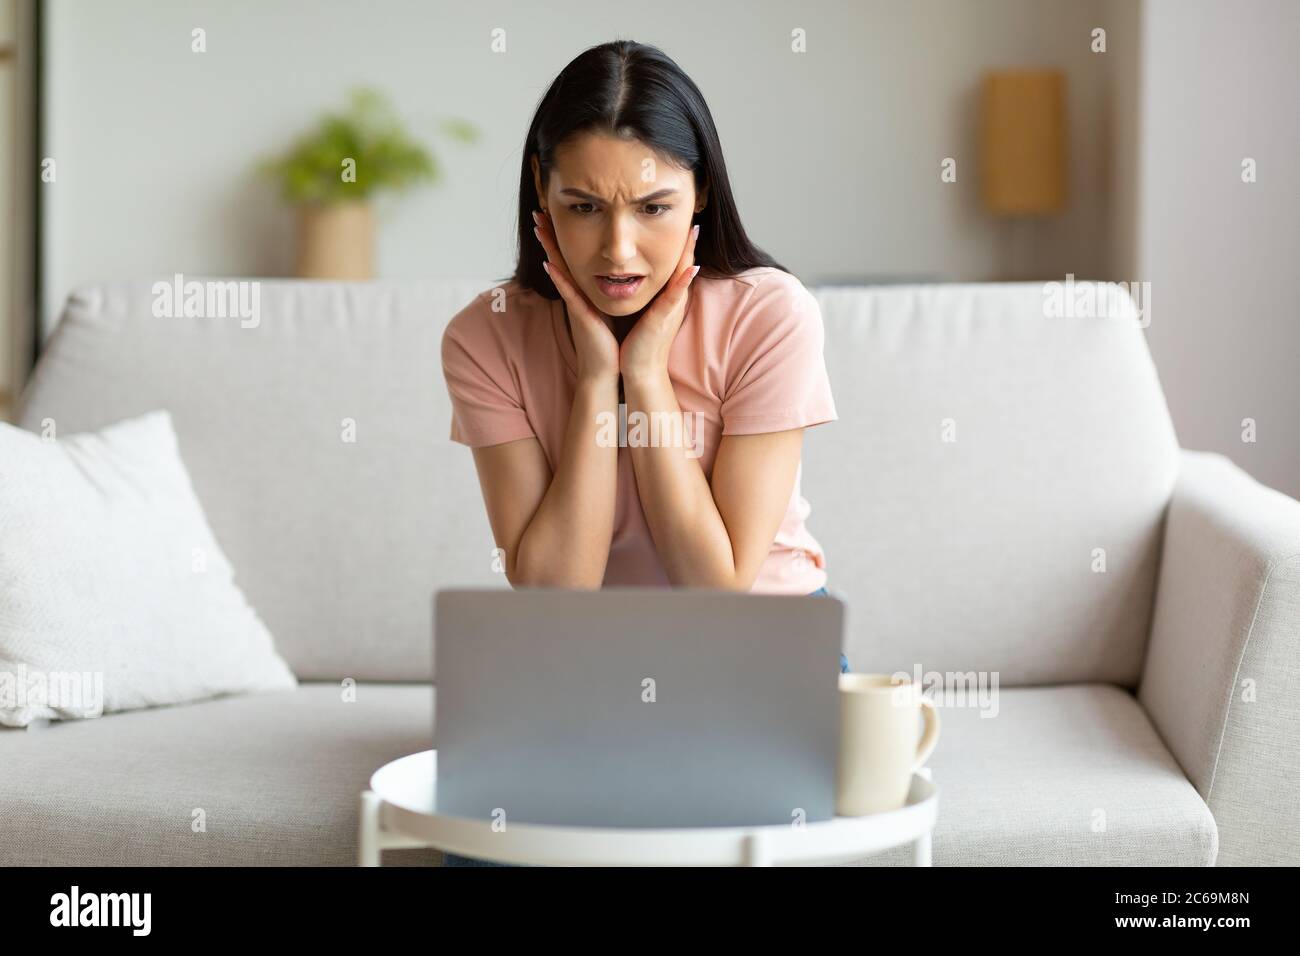 Shocked Woman At Laptop Having Bad Internet Connection At Home Stock Photo